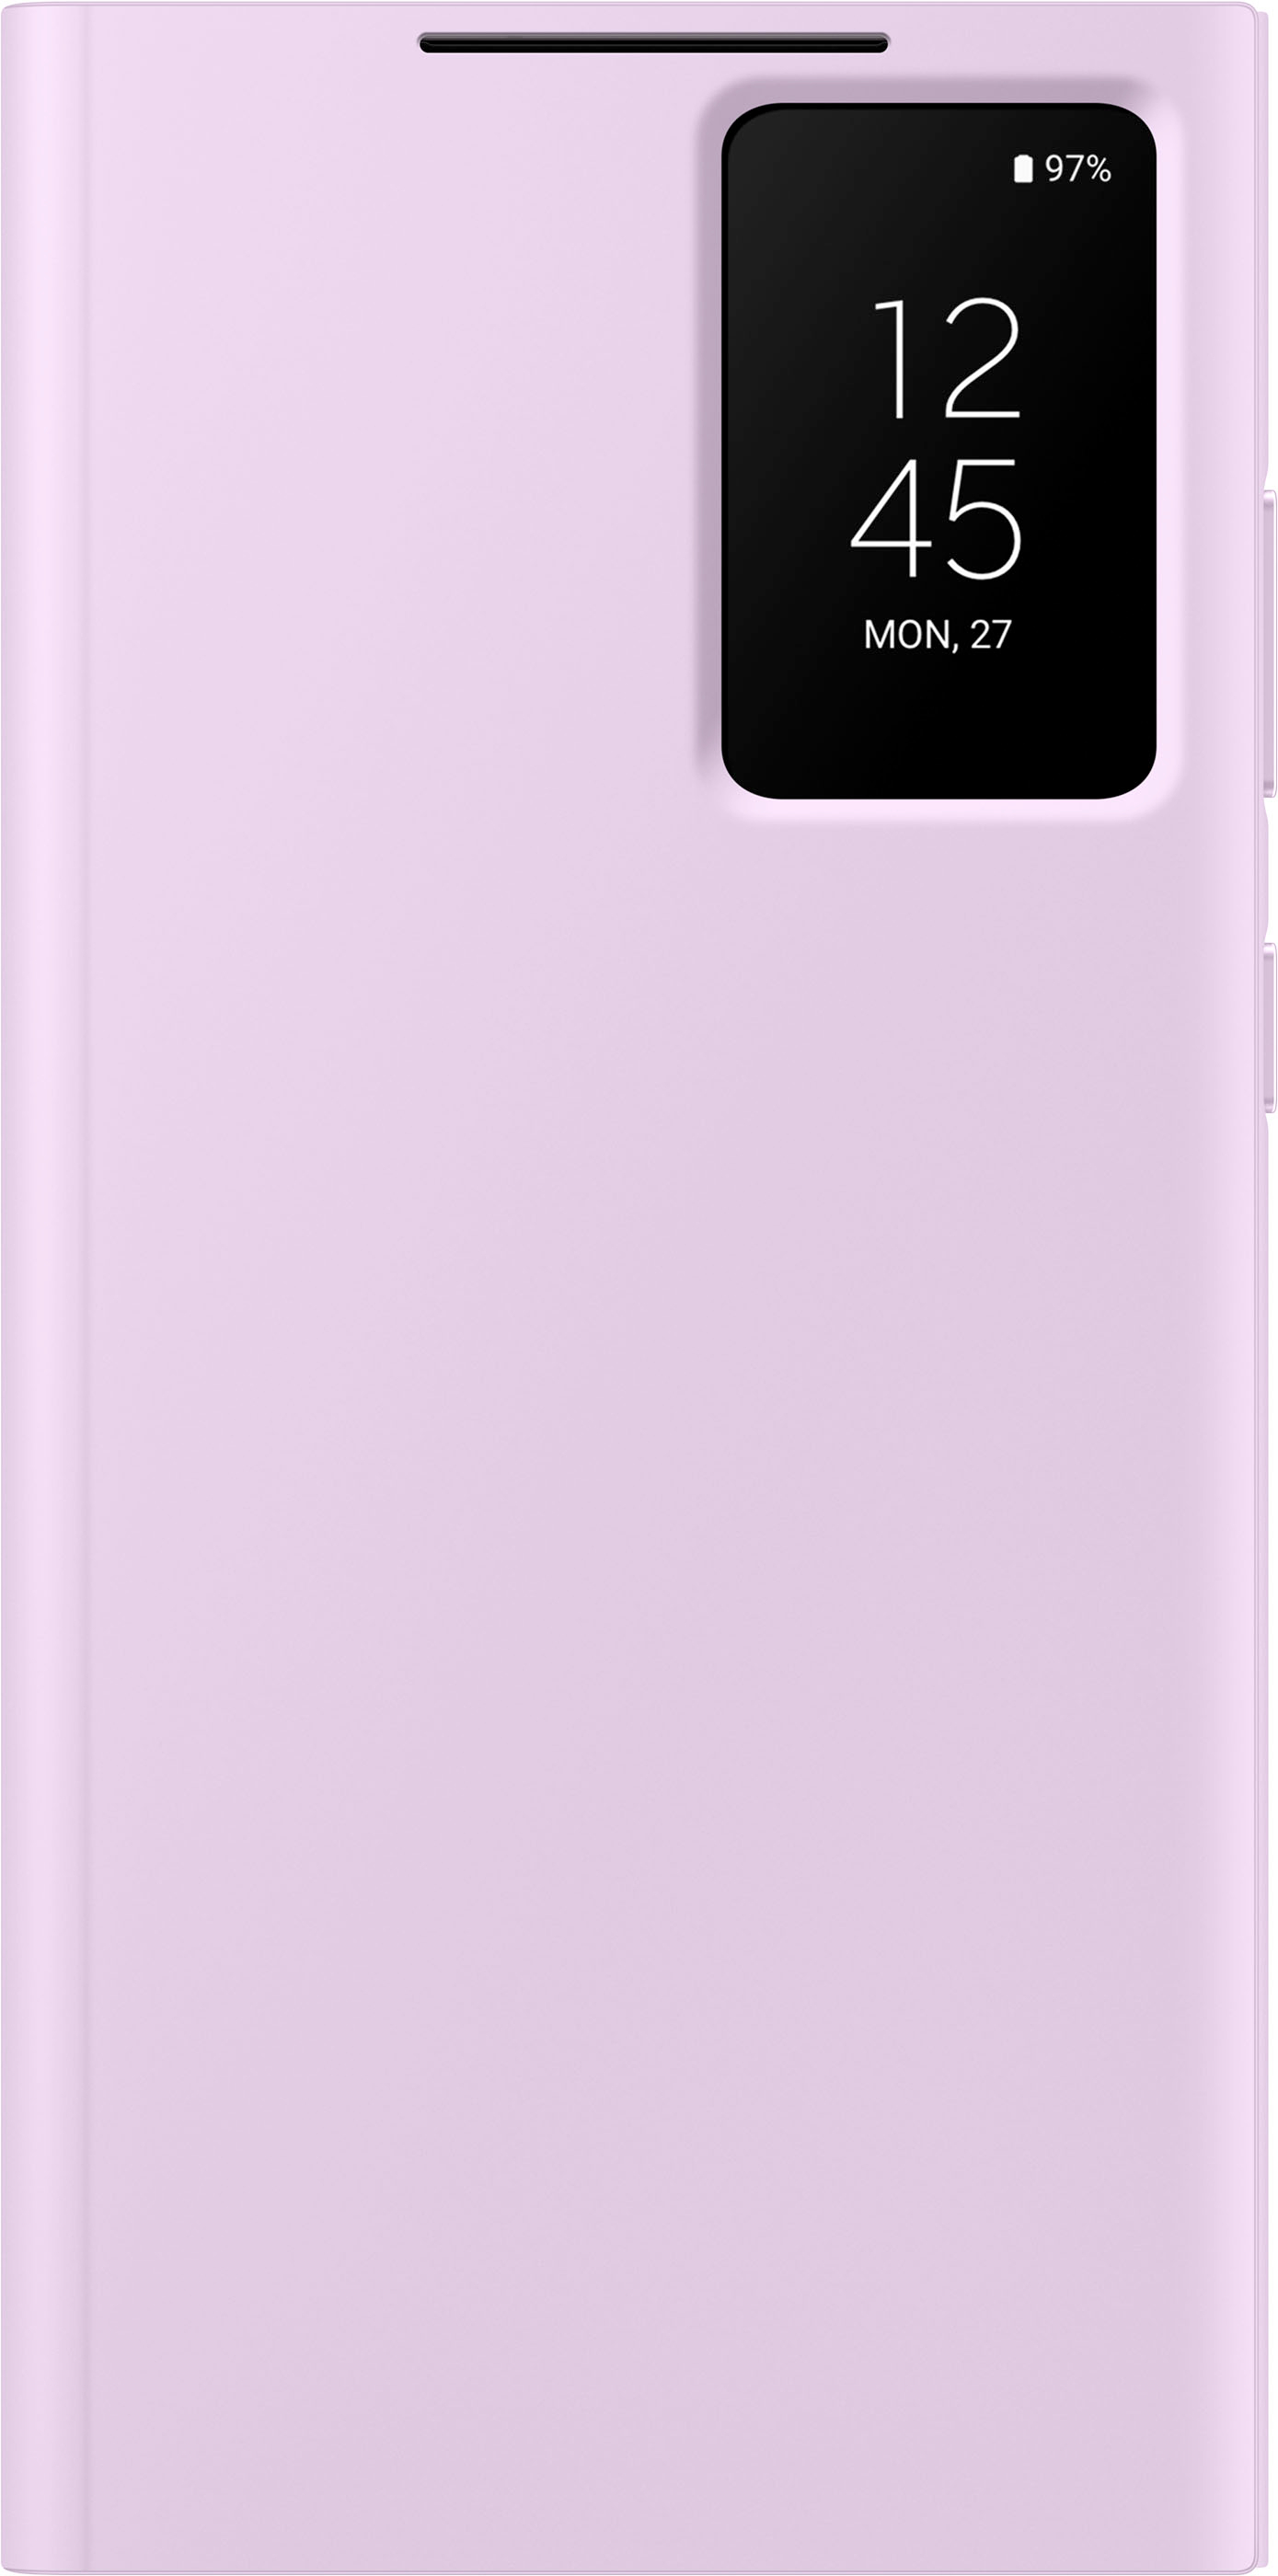 Samsung - Galaxy S23 Ultra S-View Wallet Case - Lavender